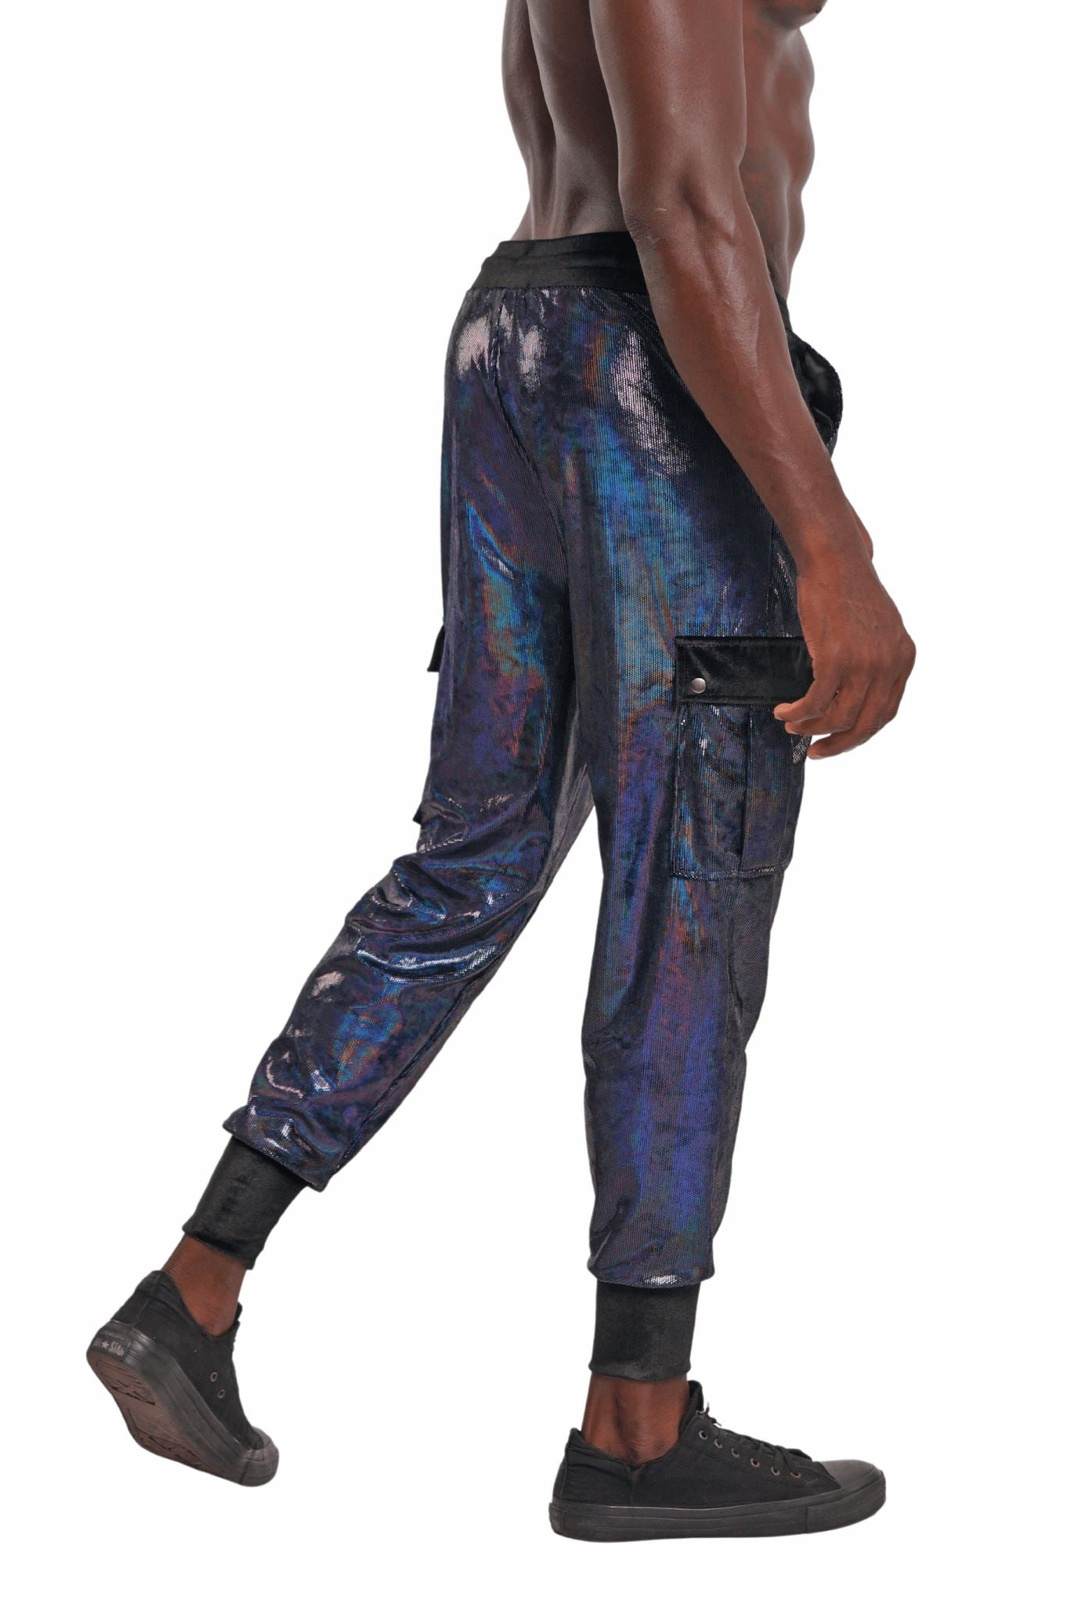 Mens skinny cargo joggers in Holographic black panther velvet from Love Khaos.